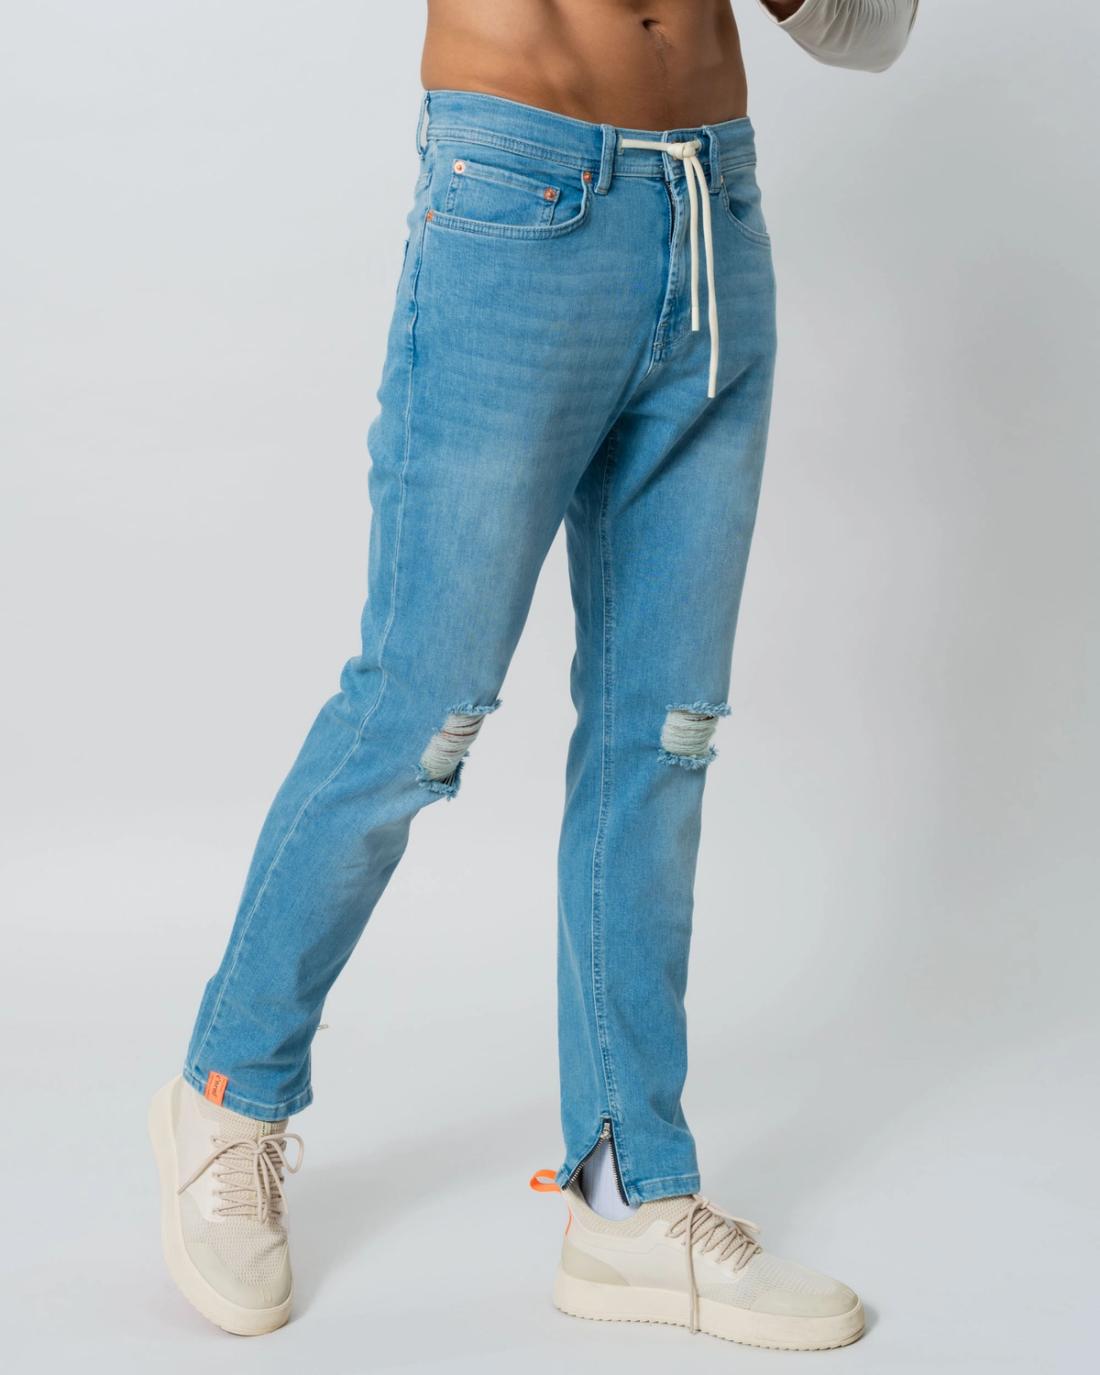 The Jeans With c'est normal - Around